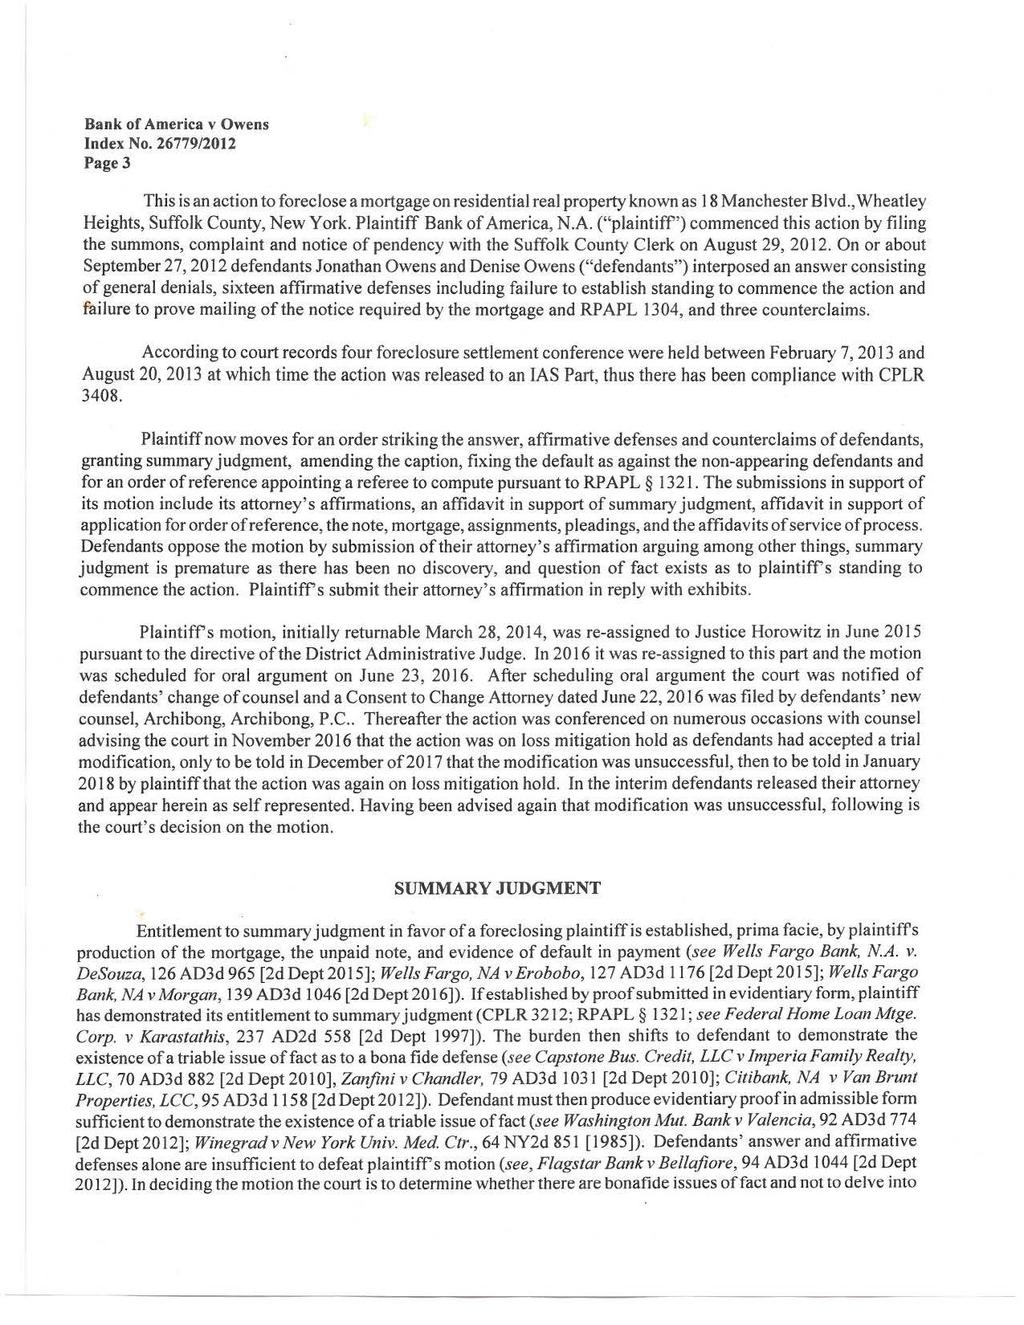 [* 3] Page3 This is an action to foreclose a mortgage on residential real property known as 18 Manchester Blvd., Wheatley Heights, Suffolk County, New York. Plaintiff Bank of Am